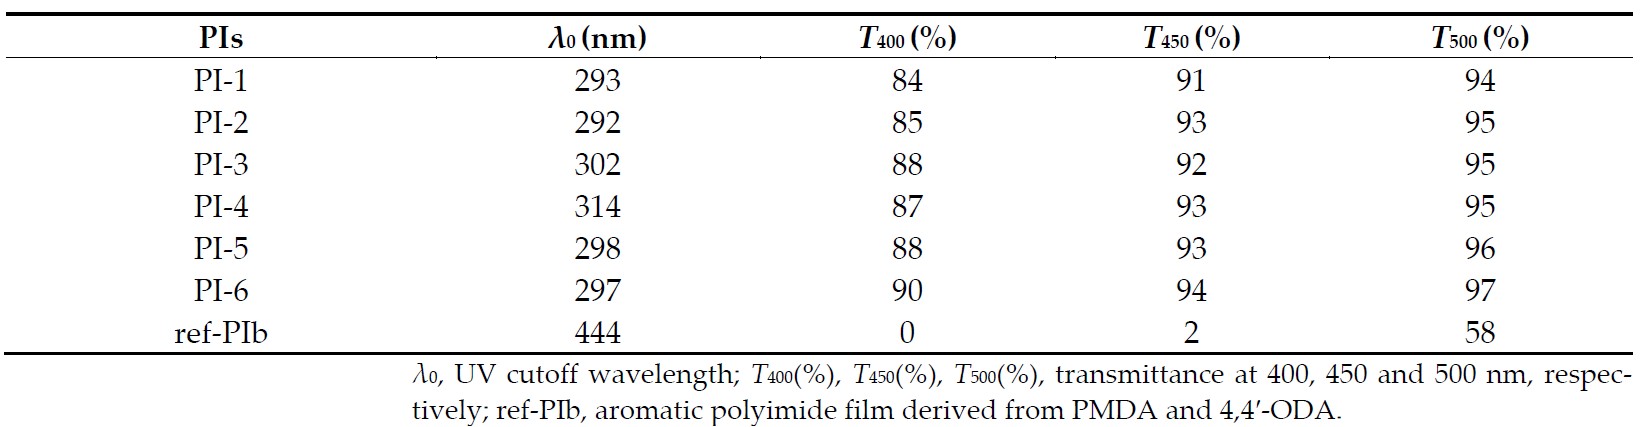 Table 4. Optical Transparency of Semi-aromatic Polyimide Films [54].